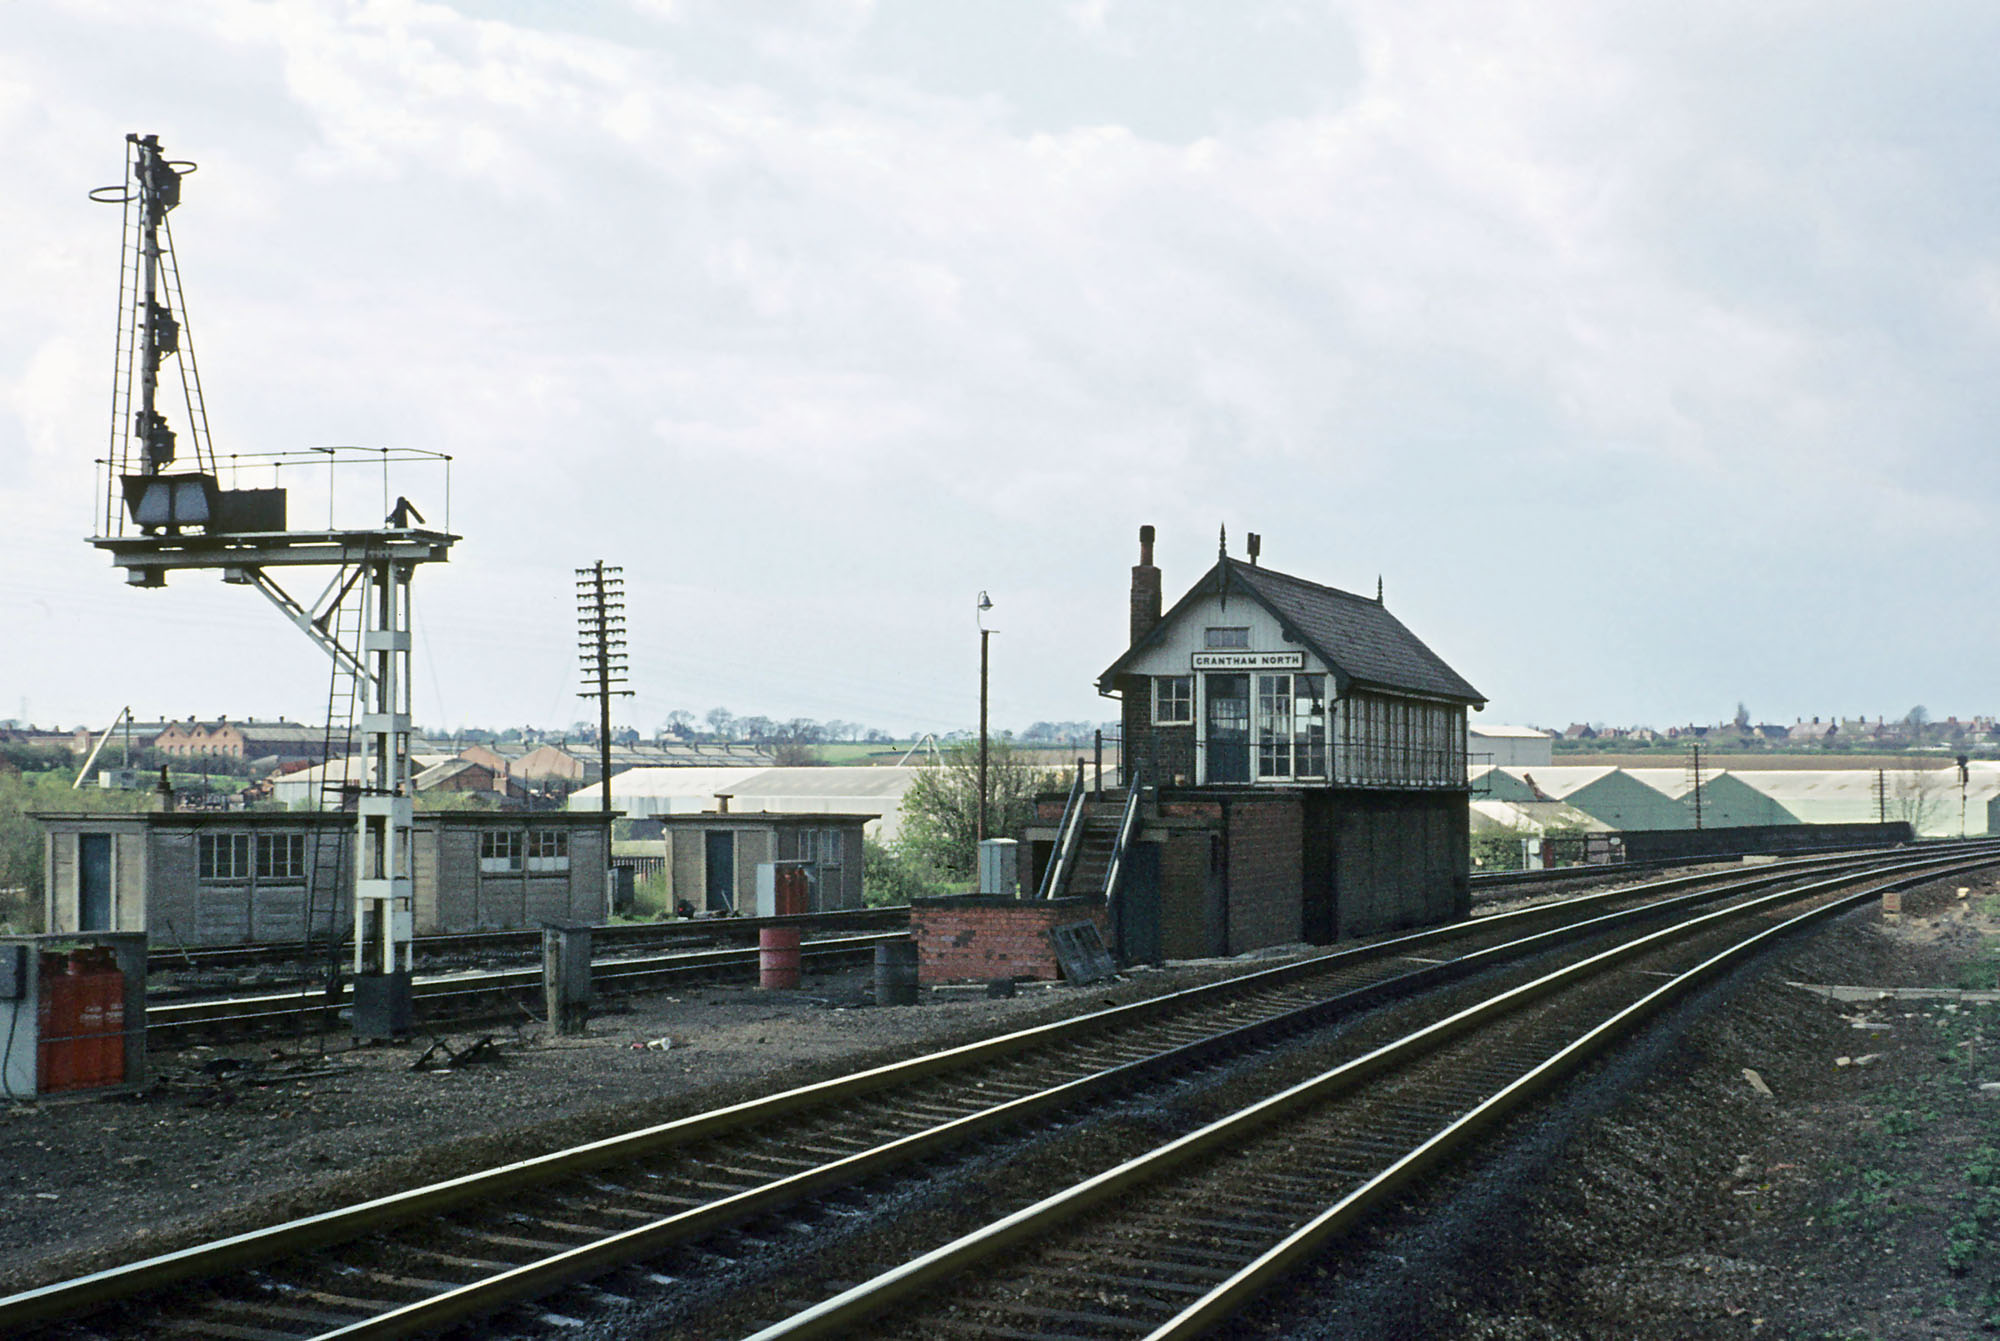 Seen on 15th April 1972, Grantham North box has been closed since 20th February. Its role was absorbed into the new Grantham panel signal box situated in the former Grantham Yard box building. Photograph from The Charles Weightman and Alan Bullimore Collection.